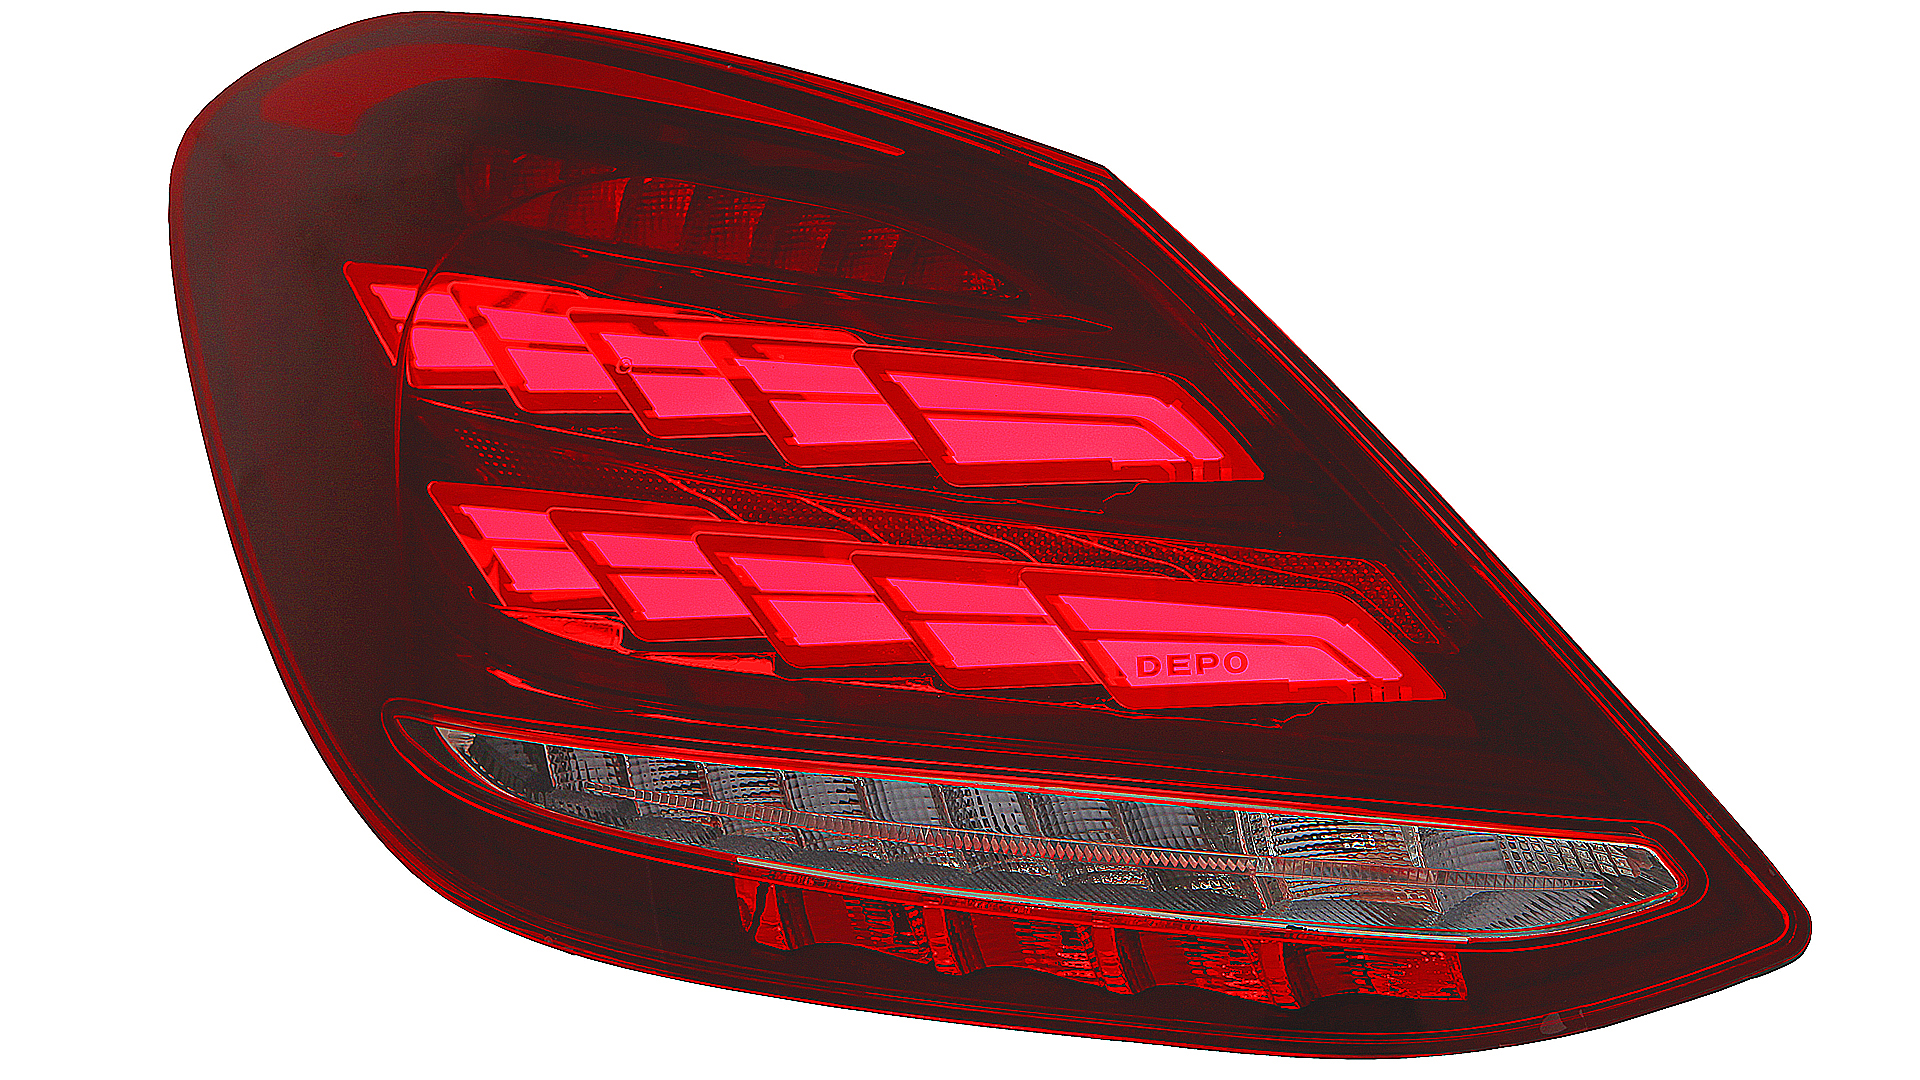 OLED TAIL LAMP / DEPO Auto Parts Ind. Co., Ltd.